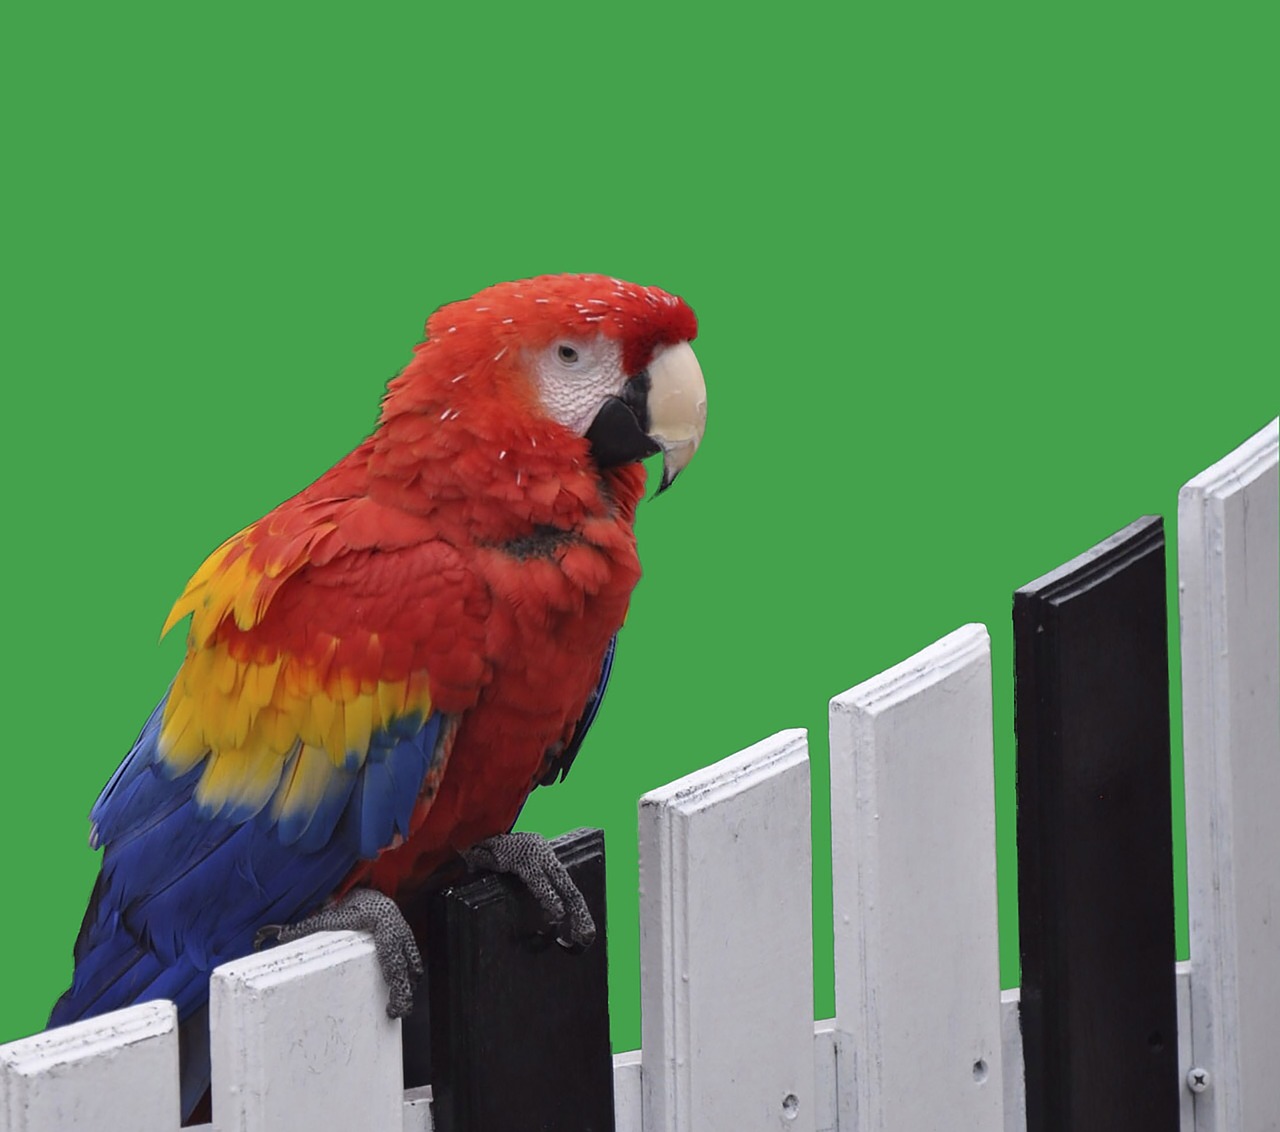 parrot red colorful free photo